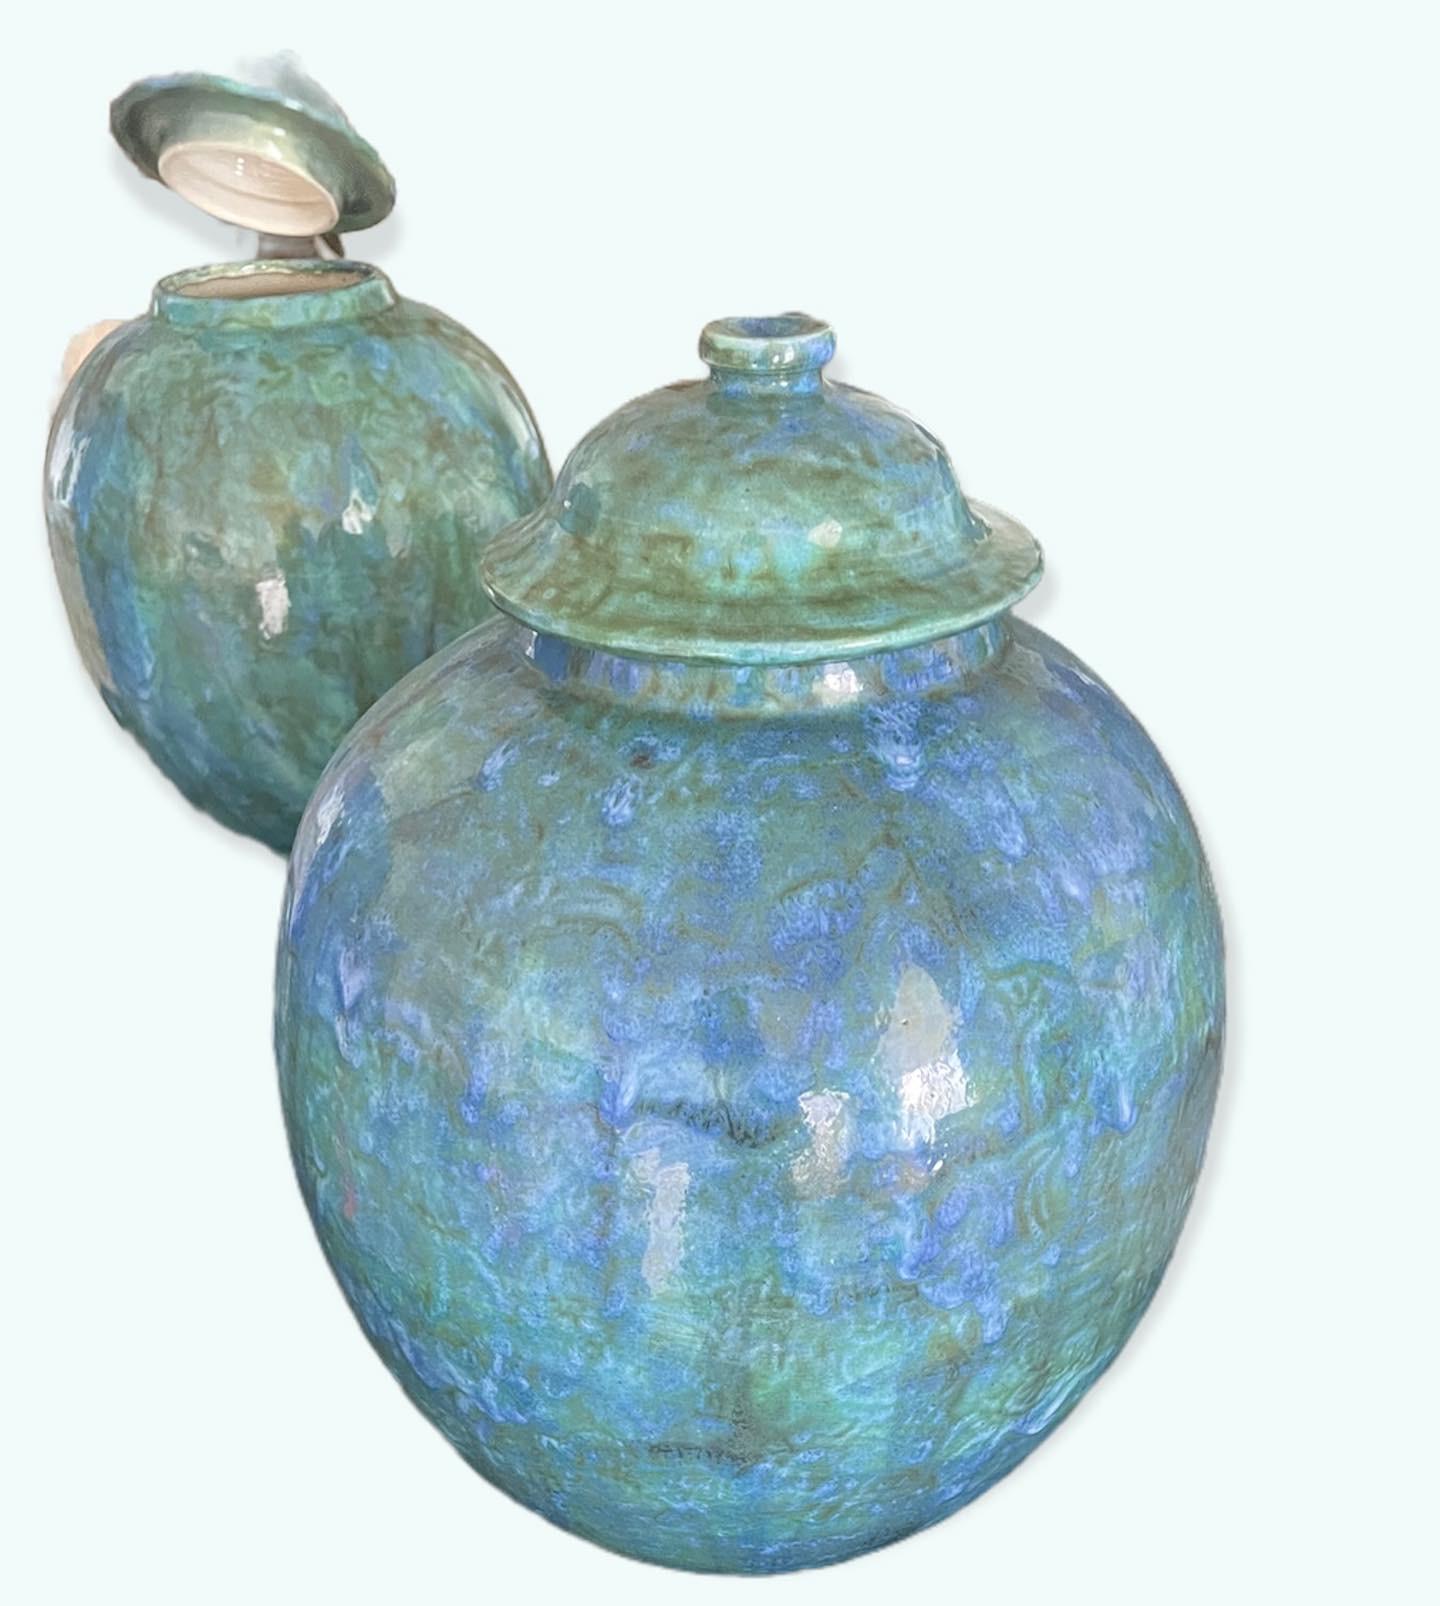 Other Dodie Thayer, The Queen Of Pottery Palm Beach' 60's, Pottery Ginger Jars